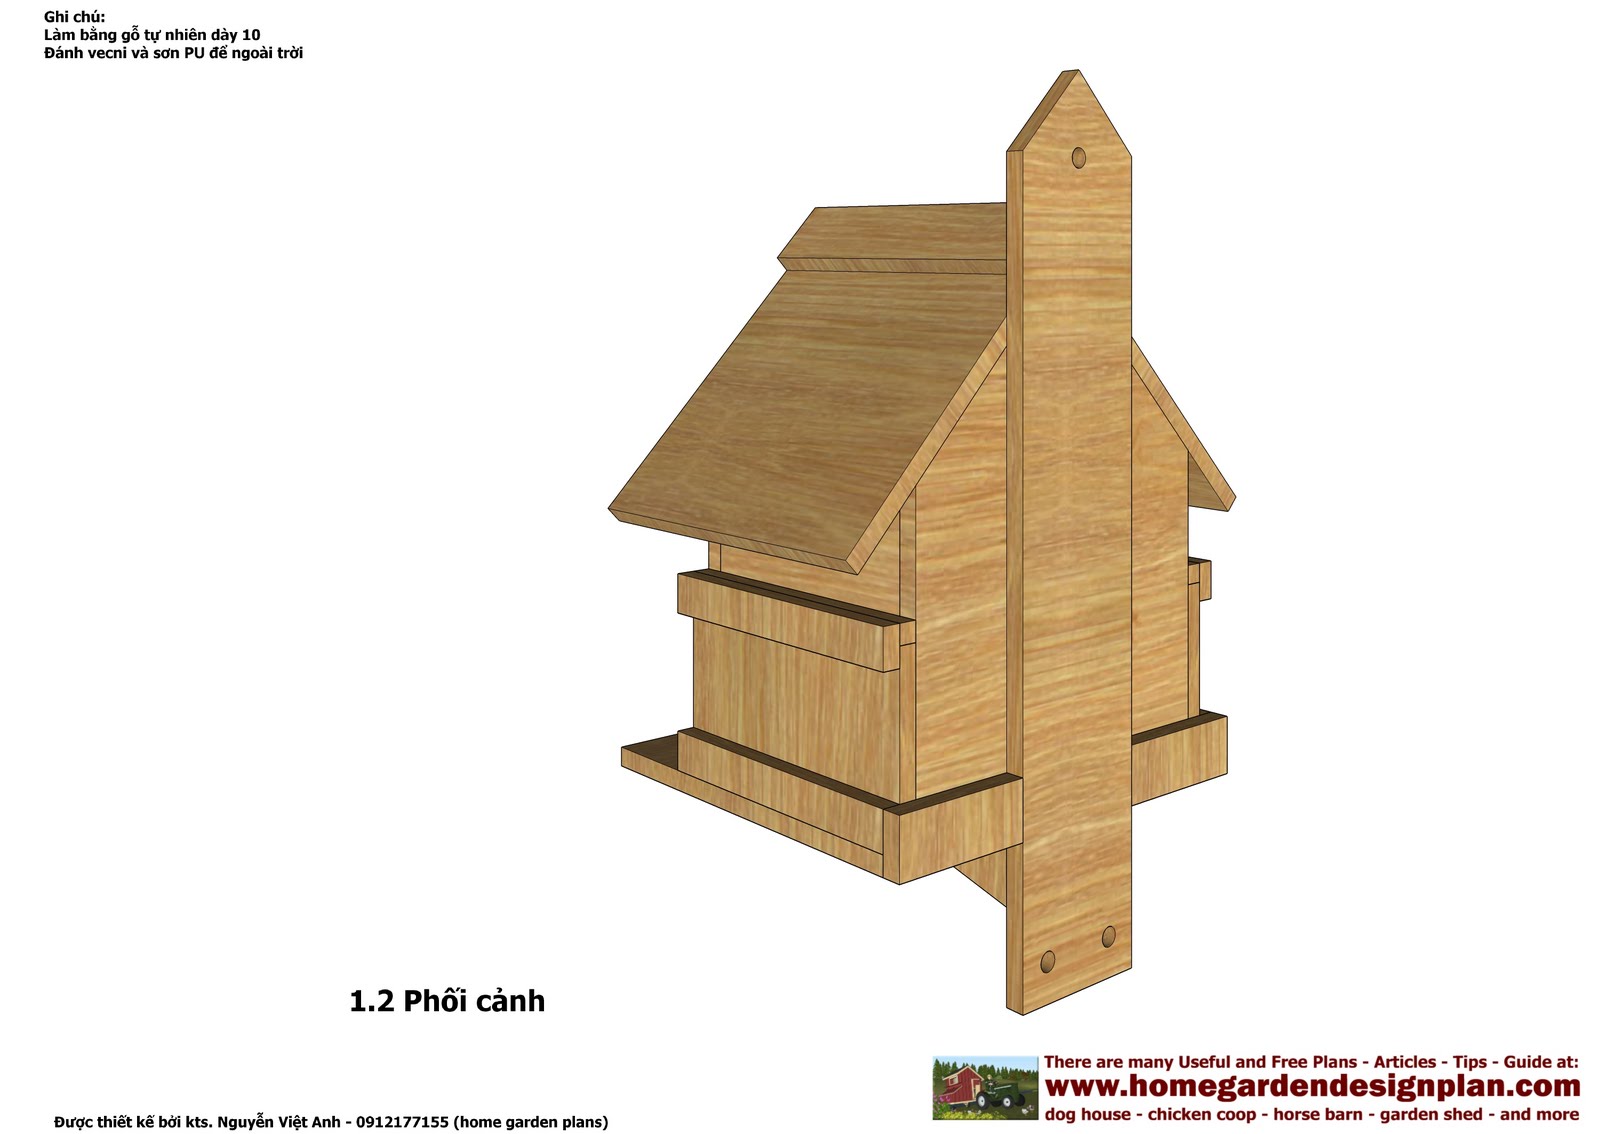  Free House Plans Blueprints. on free birdhouse plans and designs